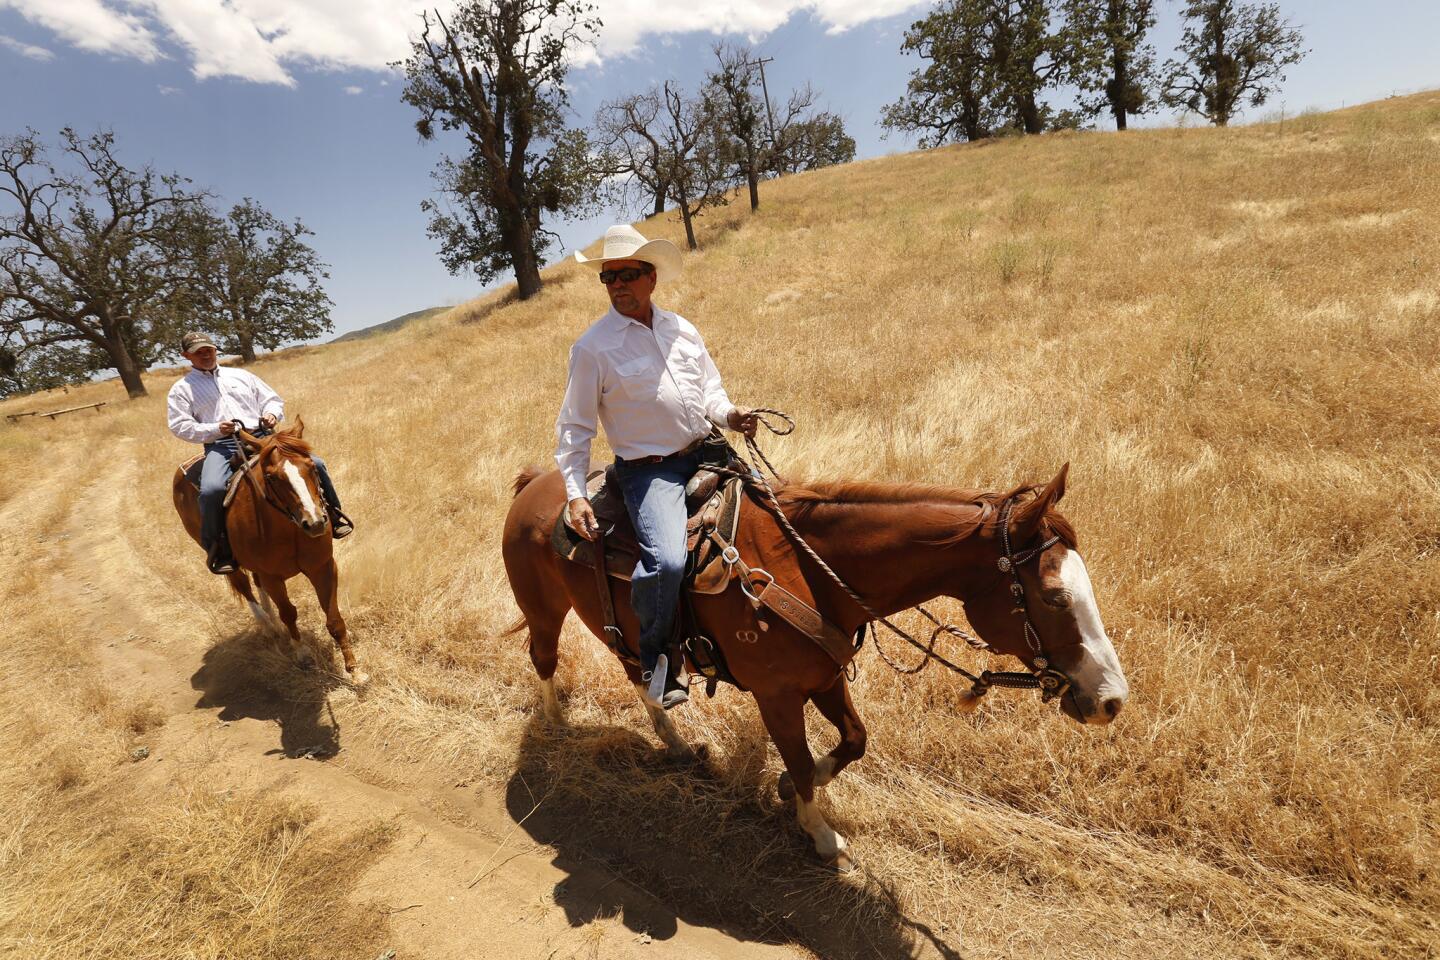 Mike Campeau, director of hunting and equestrian operations, left, and horse trainer Dean Voigt ride through the oak-studded landscape of the Explorer Recreation Area on Tejon Ranch.